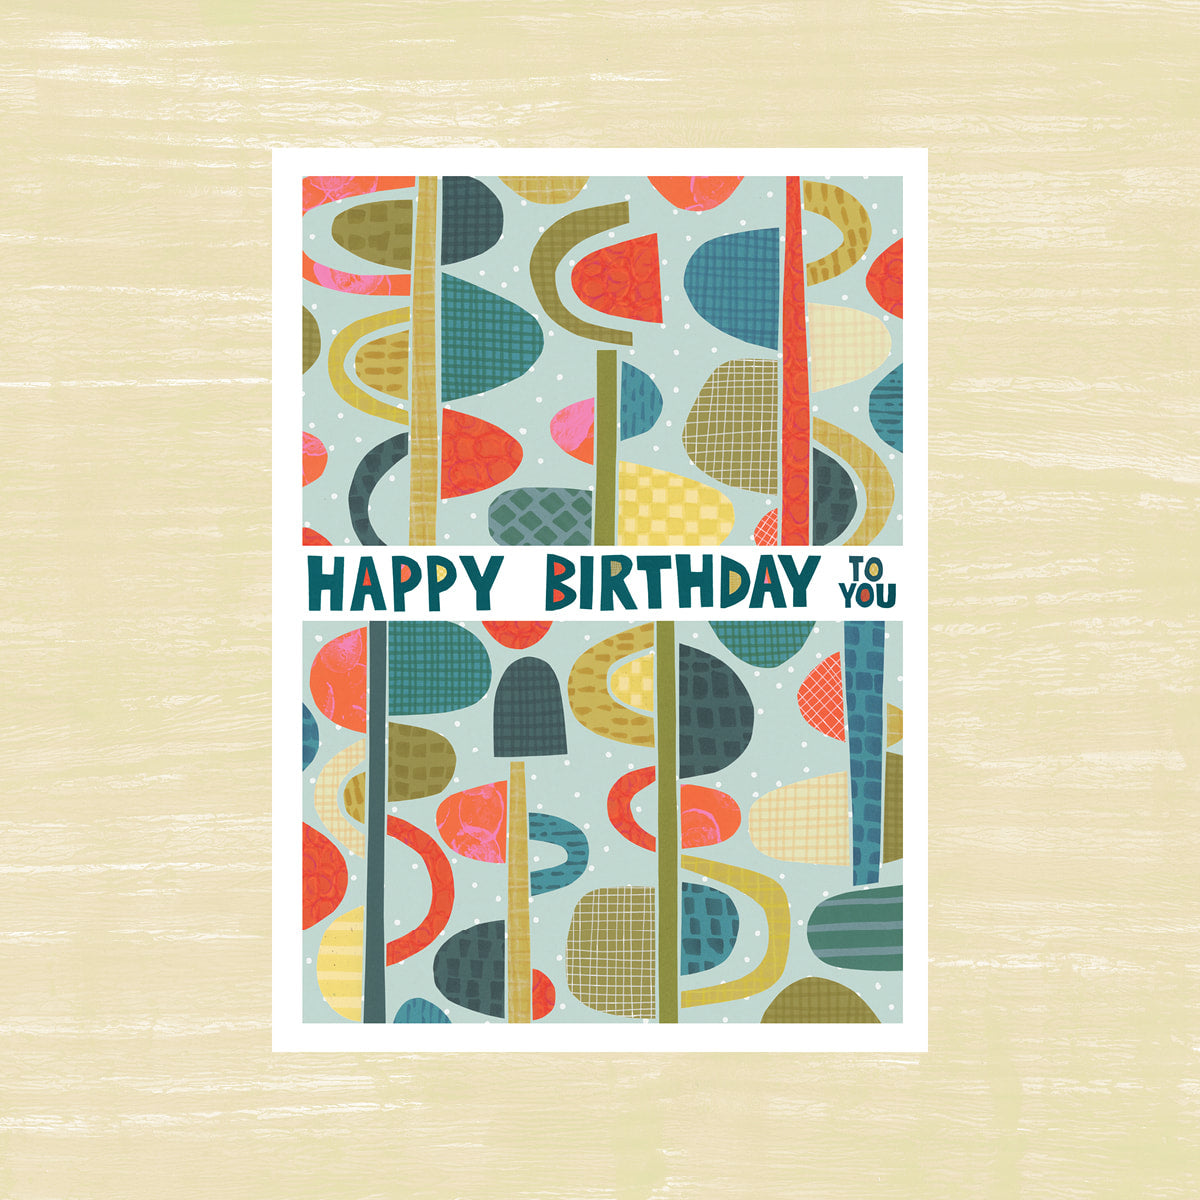 Happy Birthday to you - Greeting Card